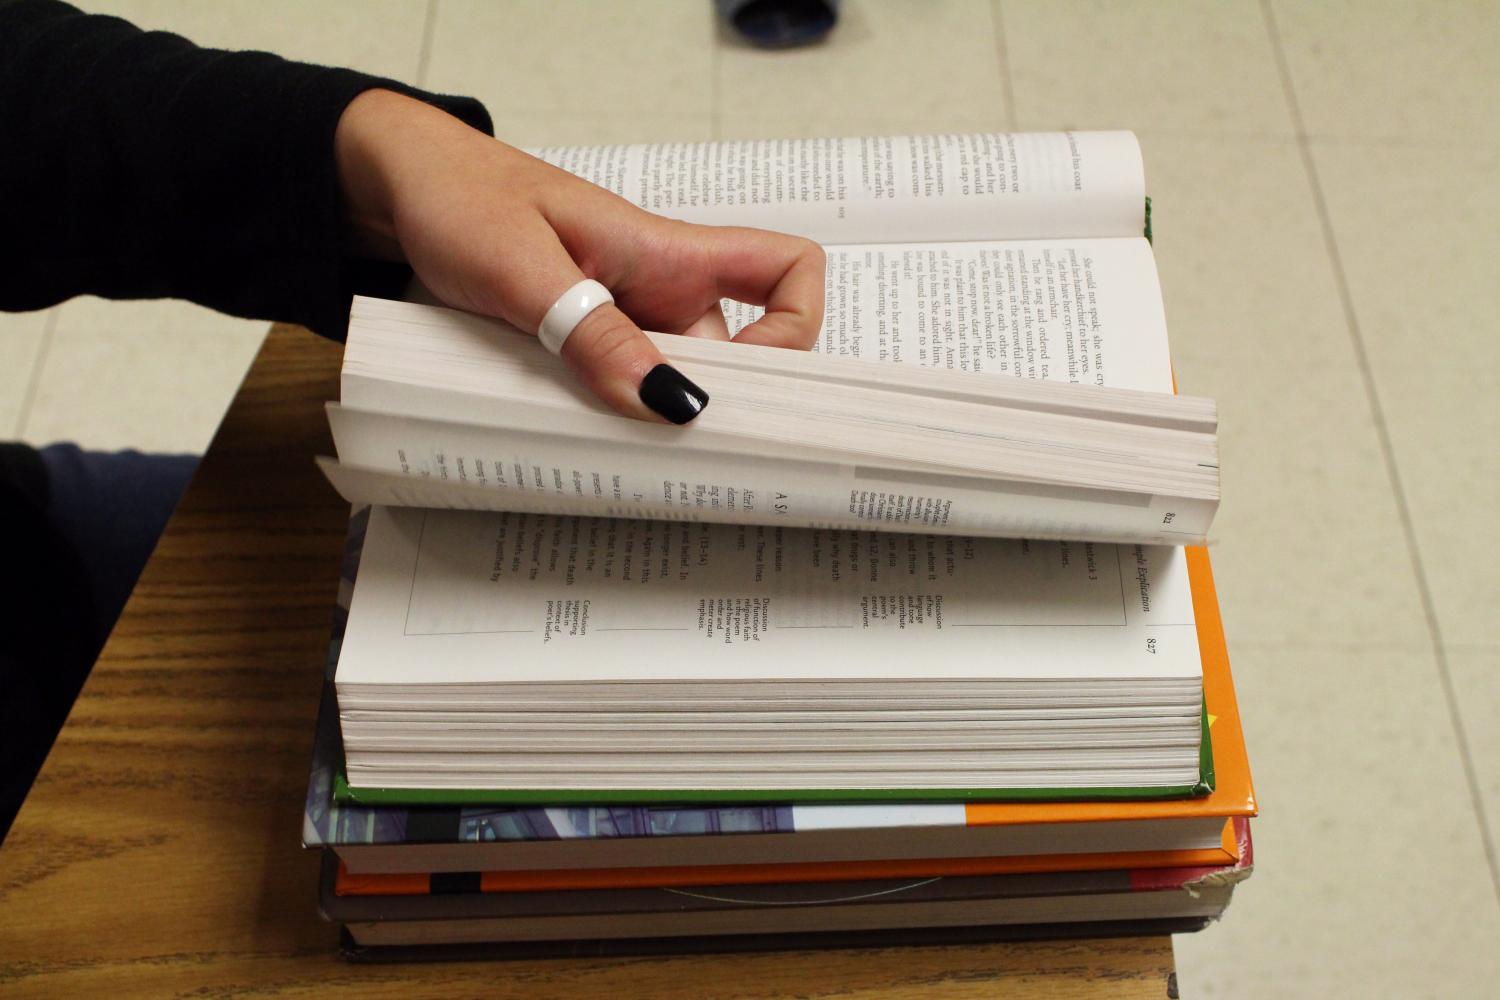 A new textbook policy is taking place this year, requiring students to turn in their textbooks in order to take their final on the regular day. Failure to return their textbook will result in a fee. Students who don’t return their books will have to take their final on a makeup day.